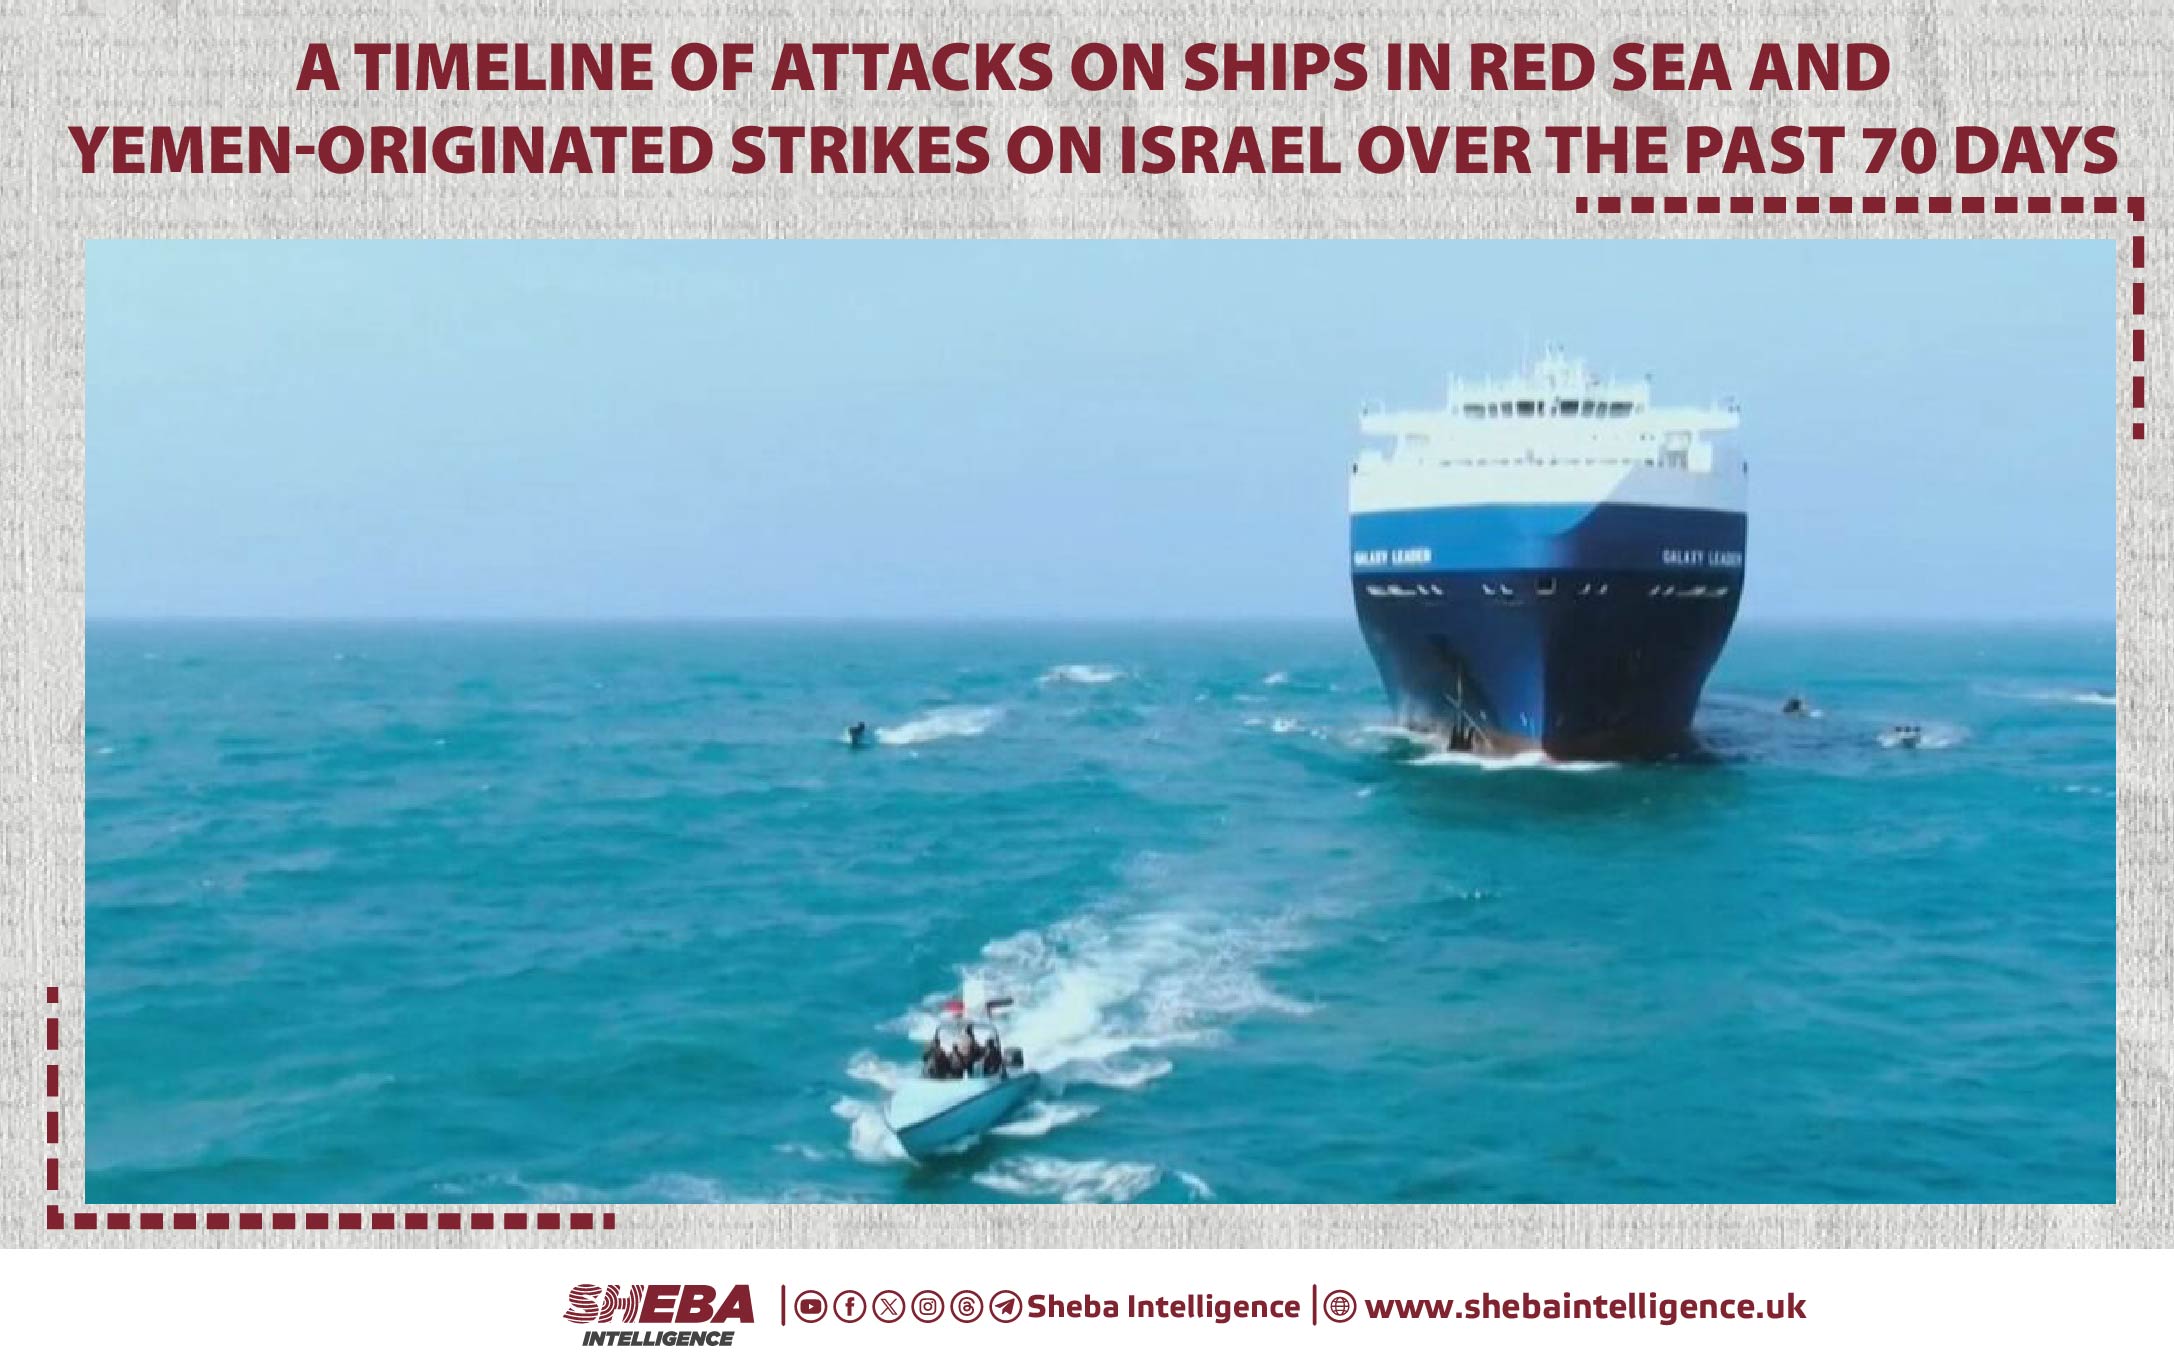 A Timeline of Attacks on Ships in Red Sea and Yemen-Originated Strikes on Israel Over the Past 70 Days